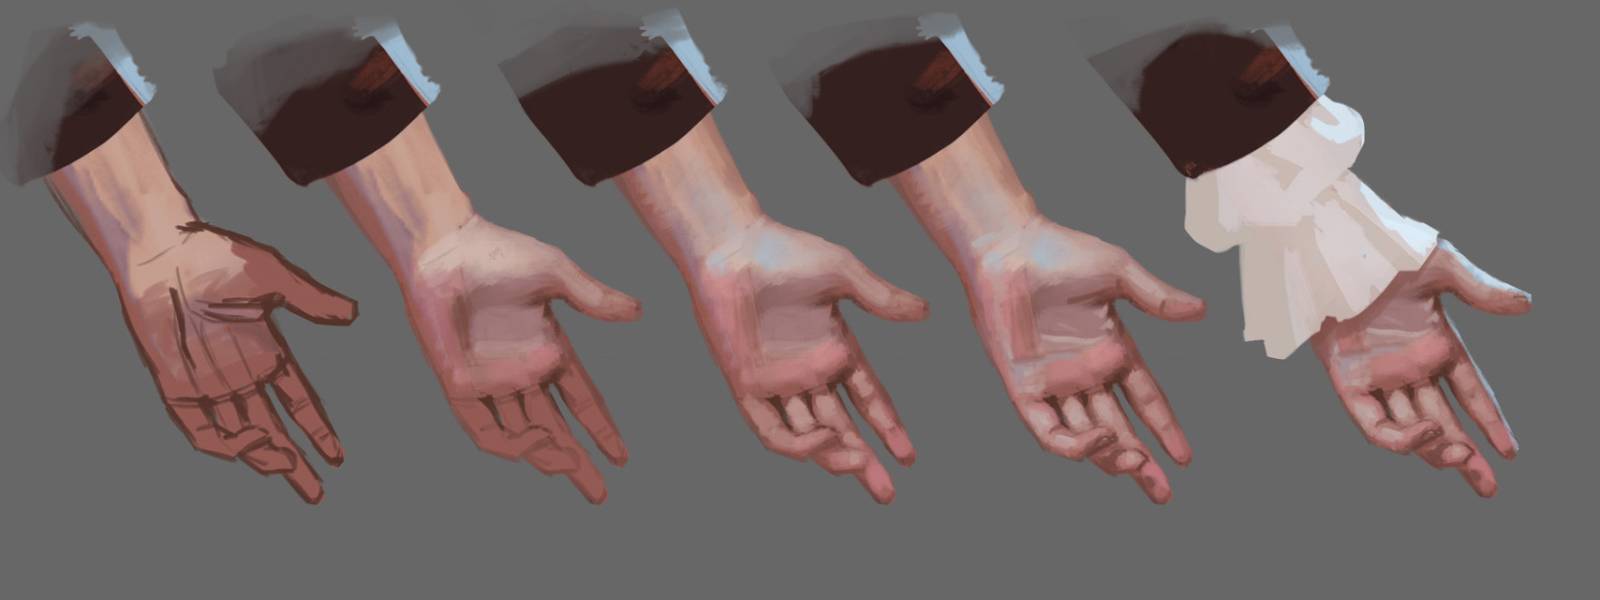 Character Design, Pt 7: Step By Step Hand Render